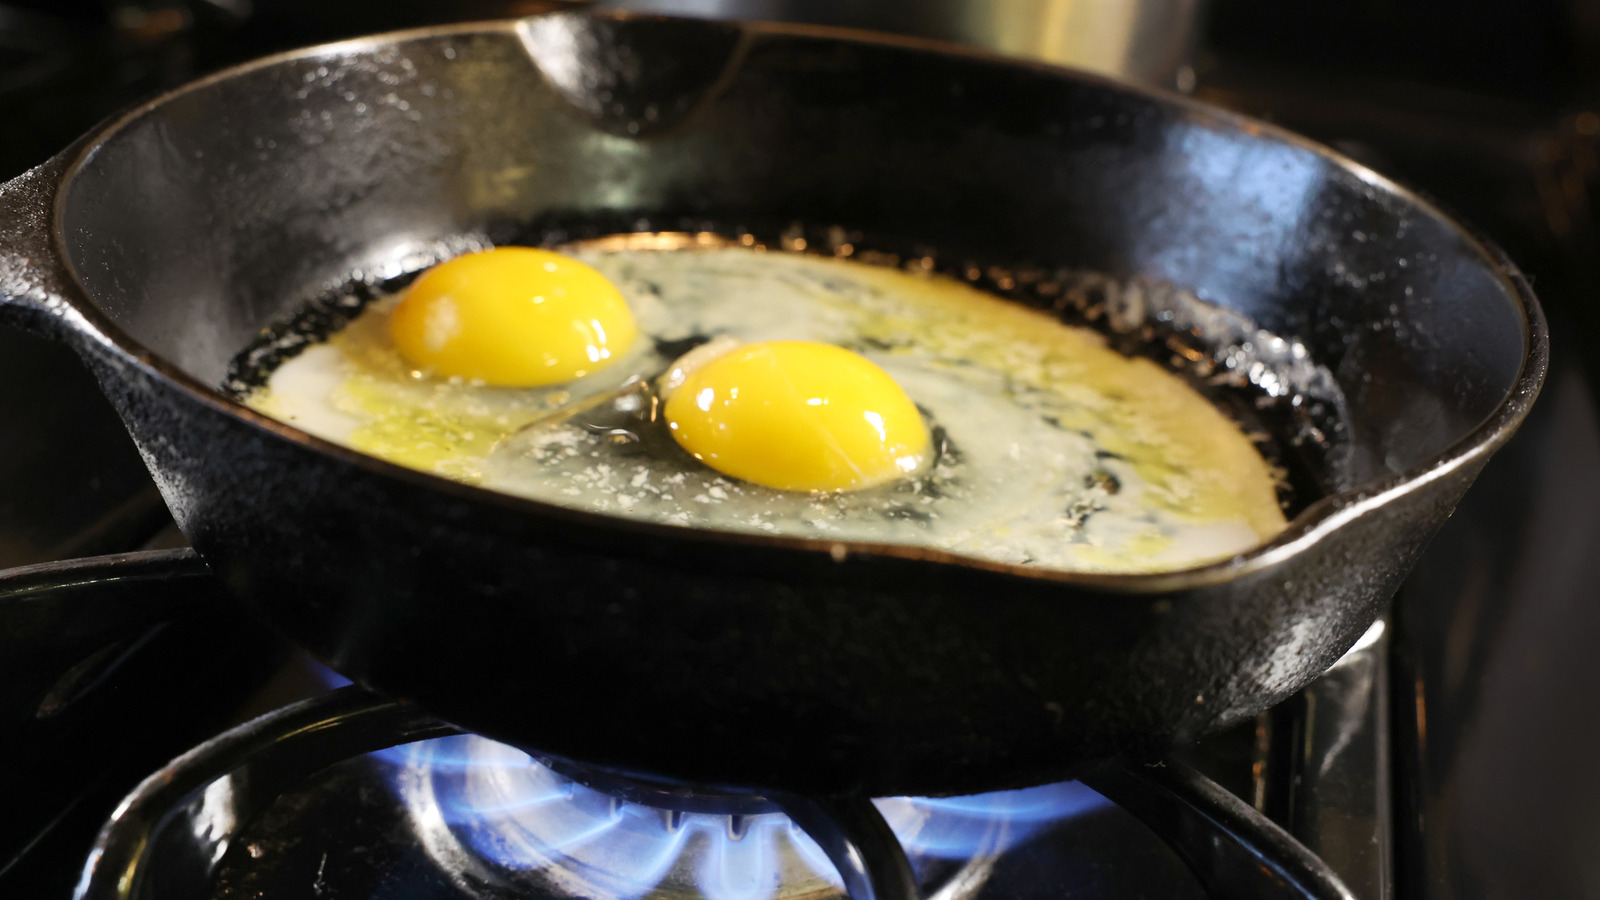 To Make Your Cast Iron Pan Better, Make Sure To Cook With It Often